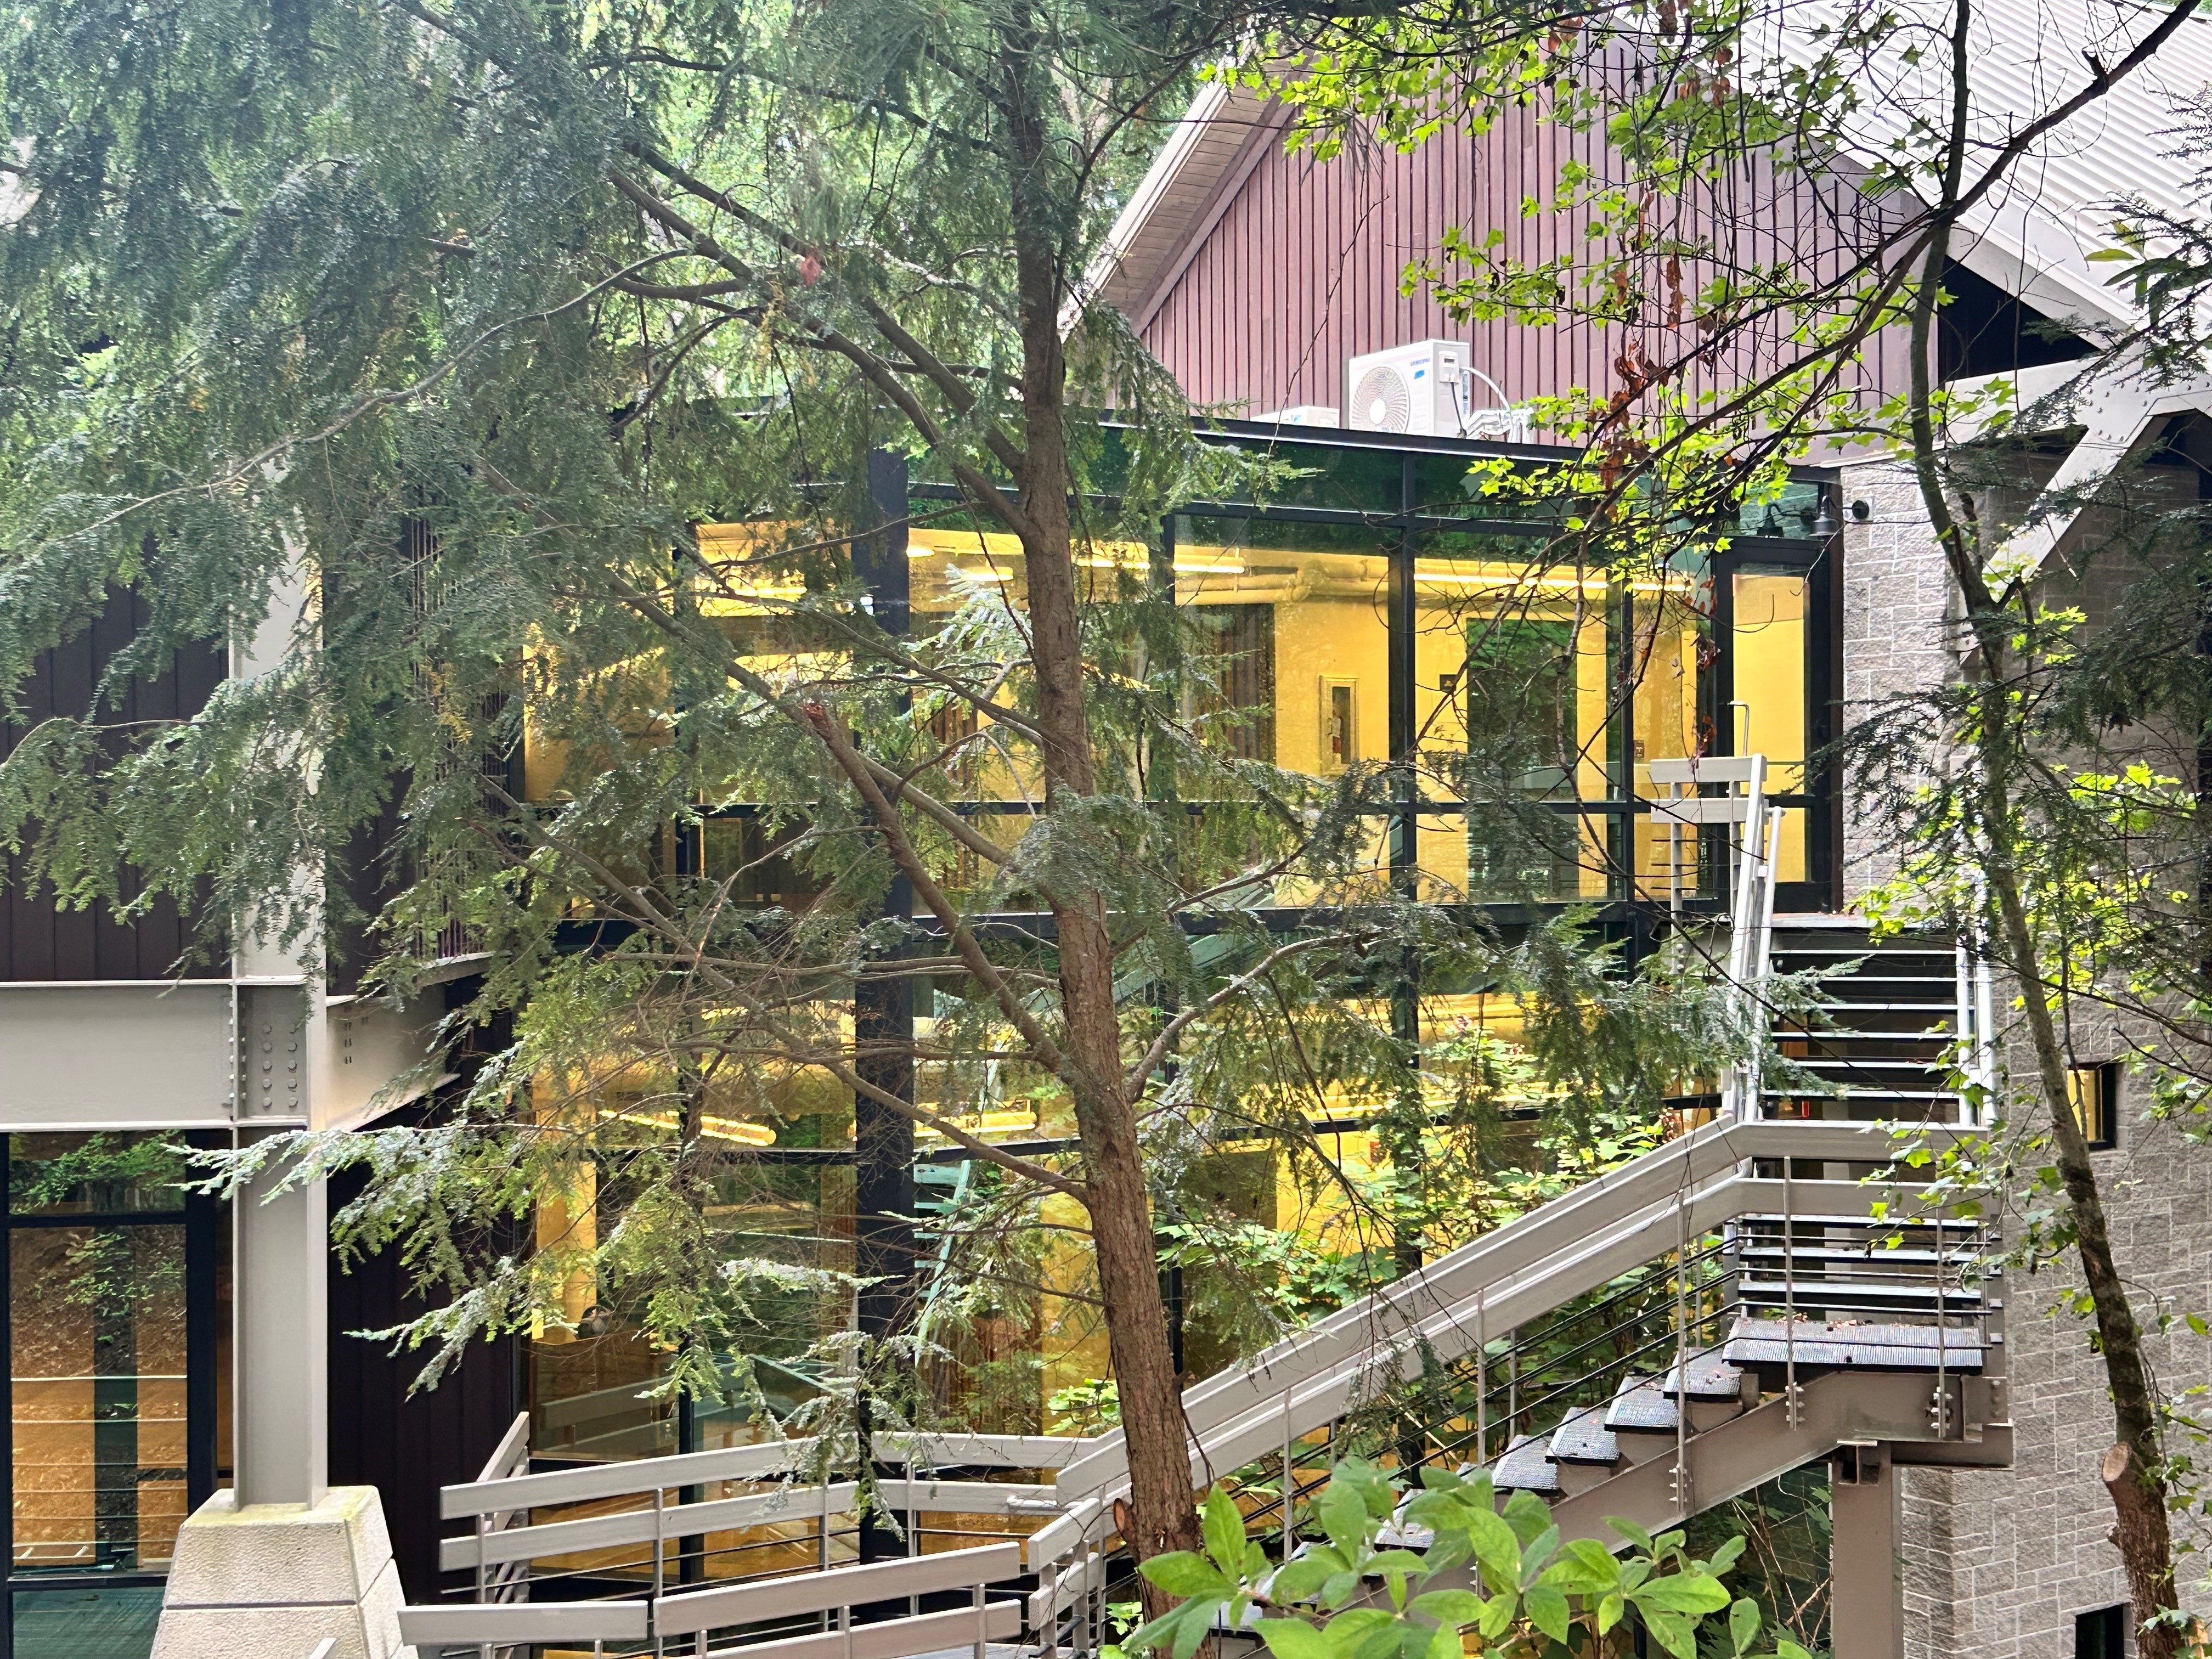 Exterior of the Center for the Environment facing campus